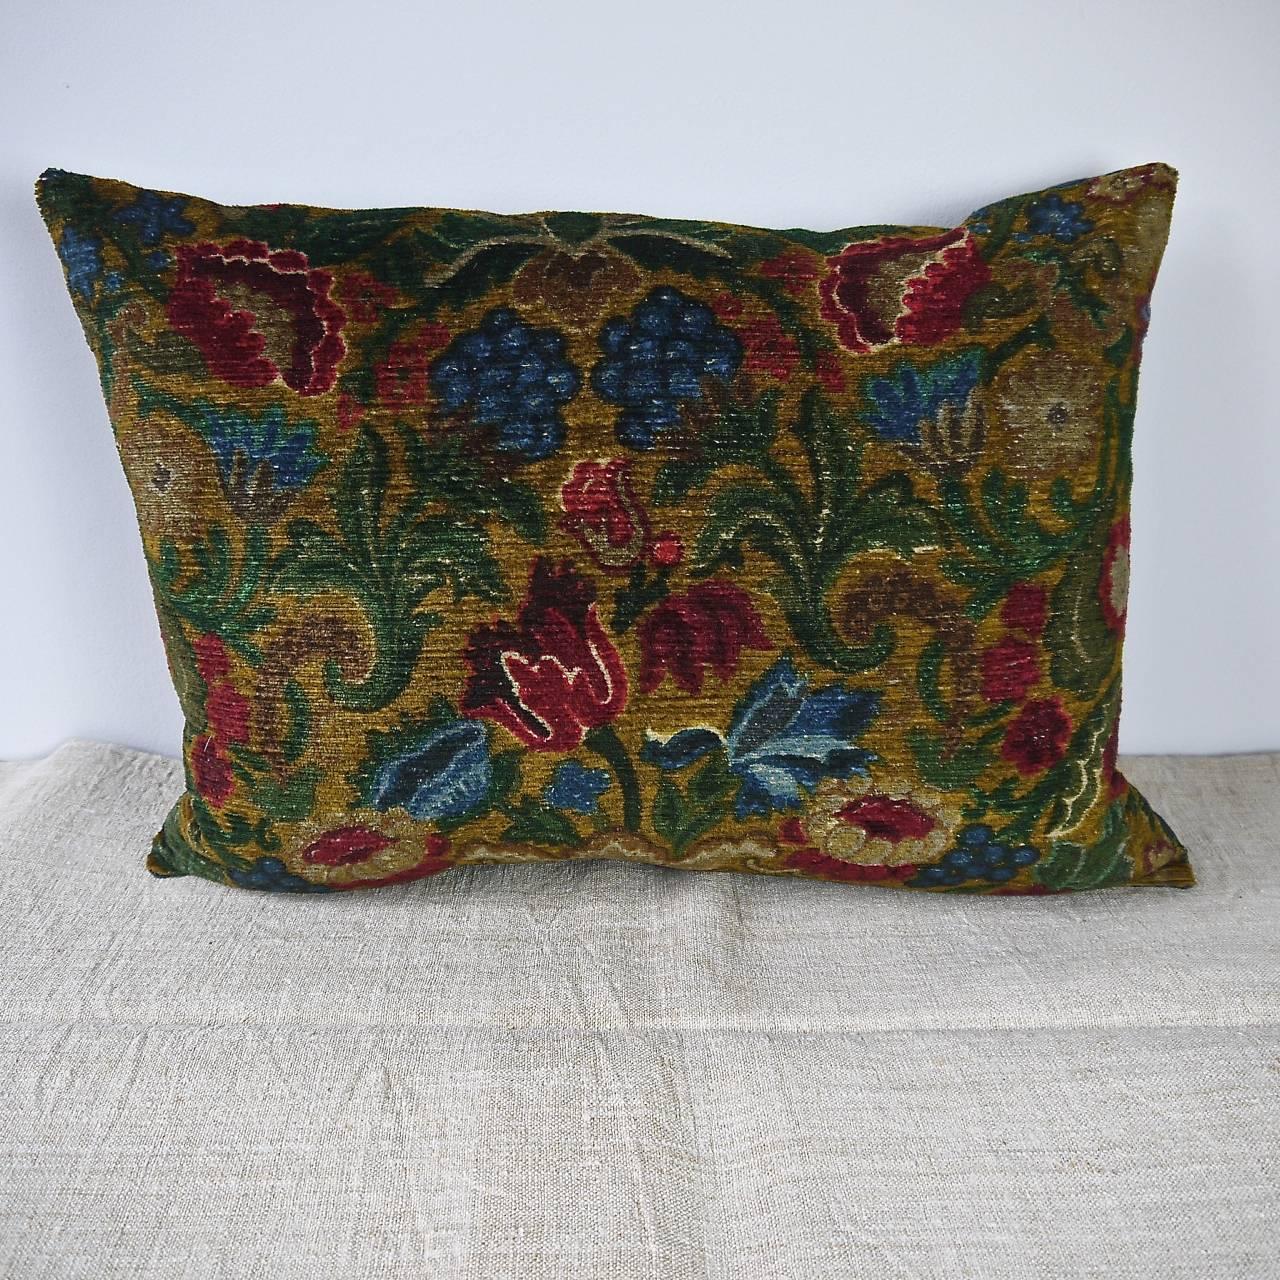 Gorgeous French, circa 1950s cotton velvet cushion printed with richly colored flowers and leaves. Backed in a hand dyed natural indigo French 19th century linen. Slipstitched closed with a duck feather cushion pad.